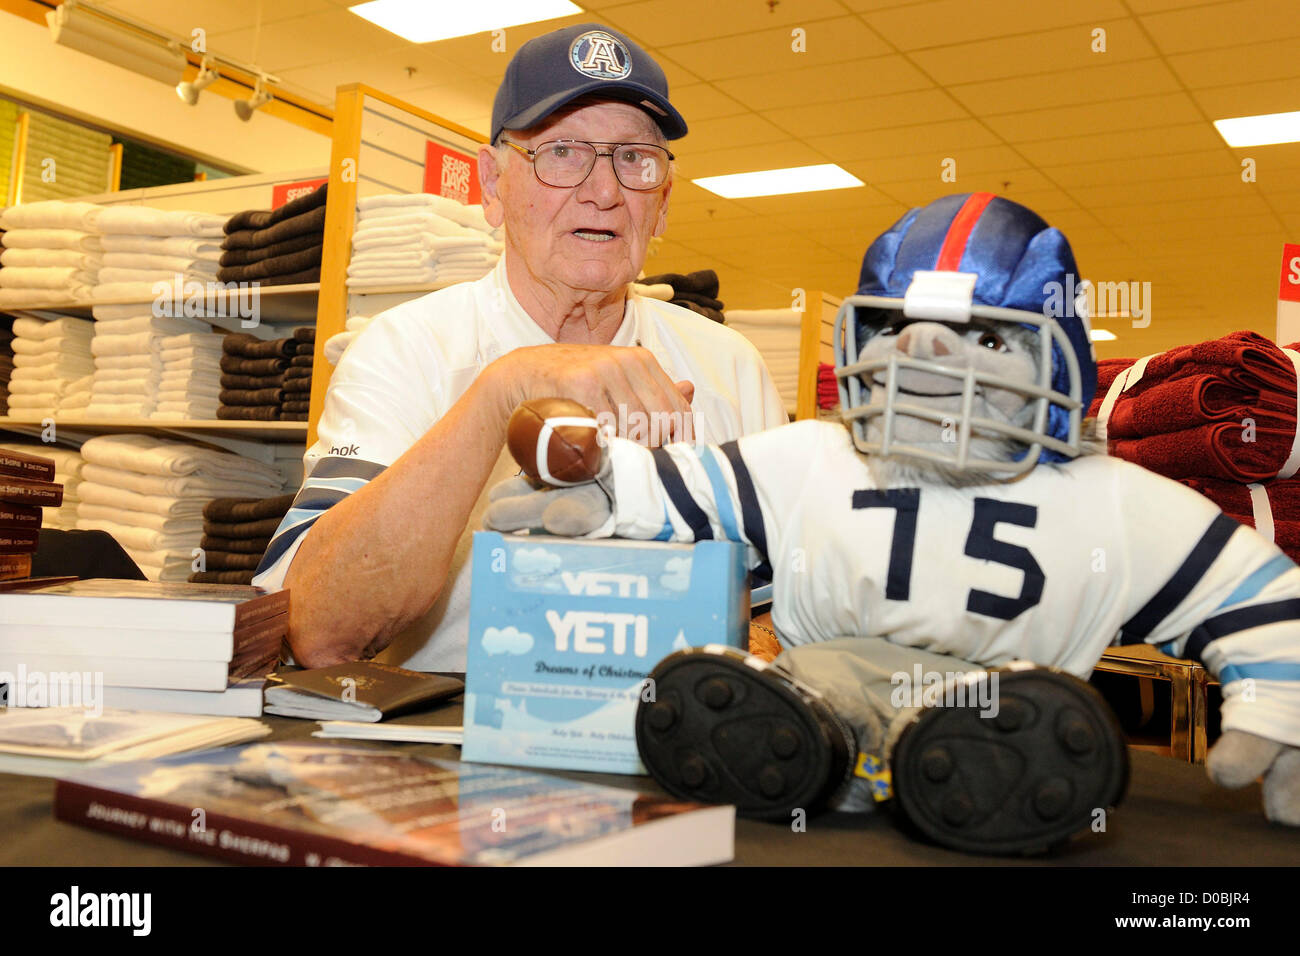 November 21, 2012. Toronto, Canada. CFL Argonauts Legend Zeke O'Connor  signs copies of his new book: Journey with the Sherpas at the Sears department store in Fairview Mall. (DCP/N8N) Stock Photo